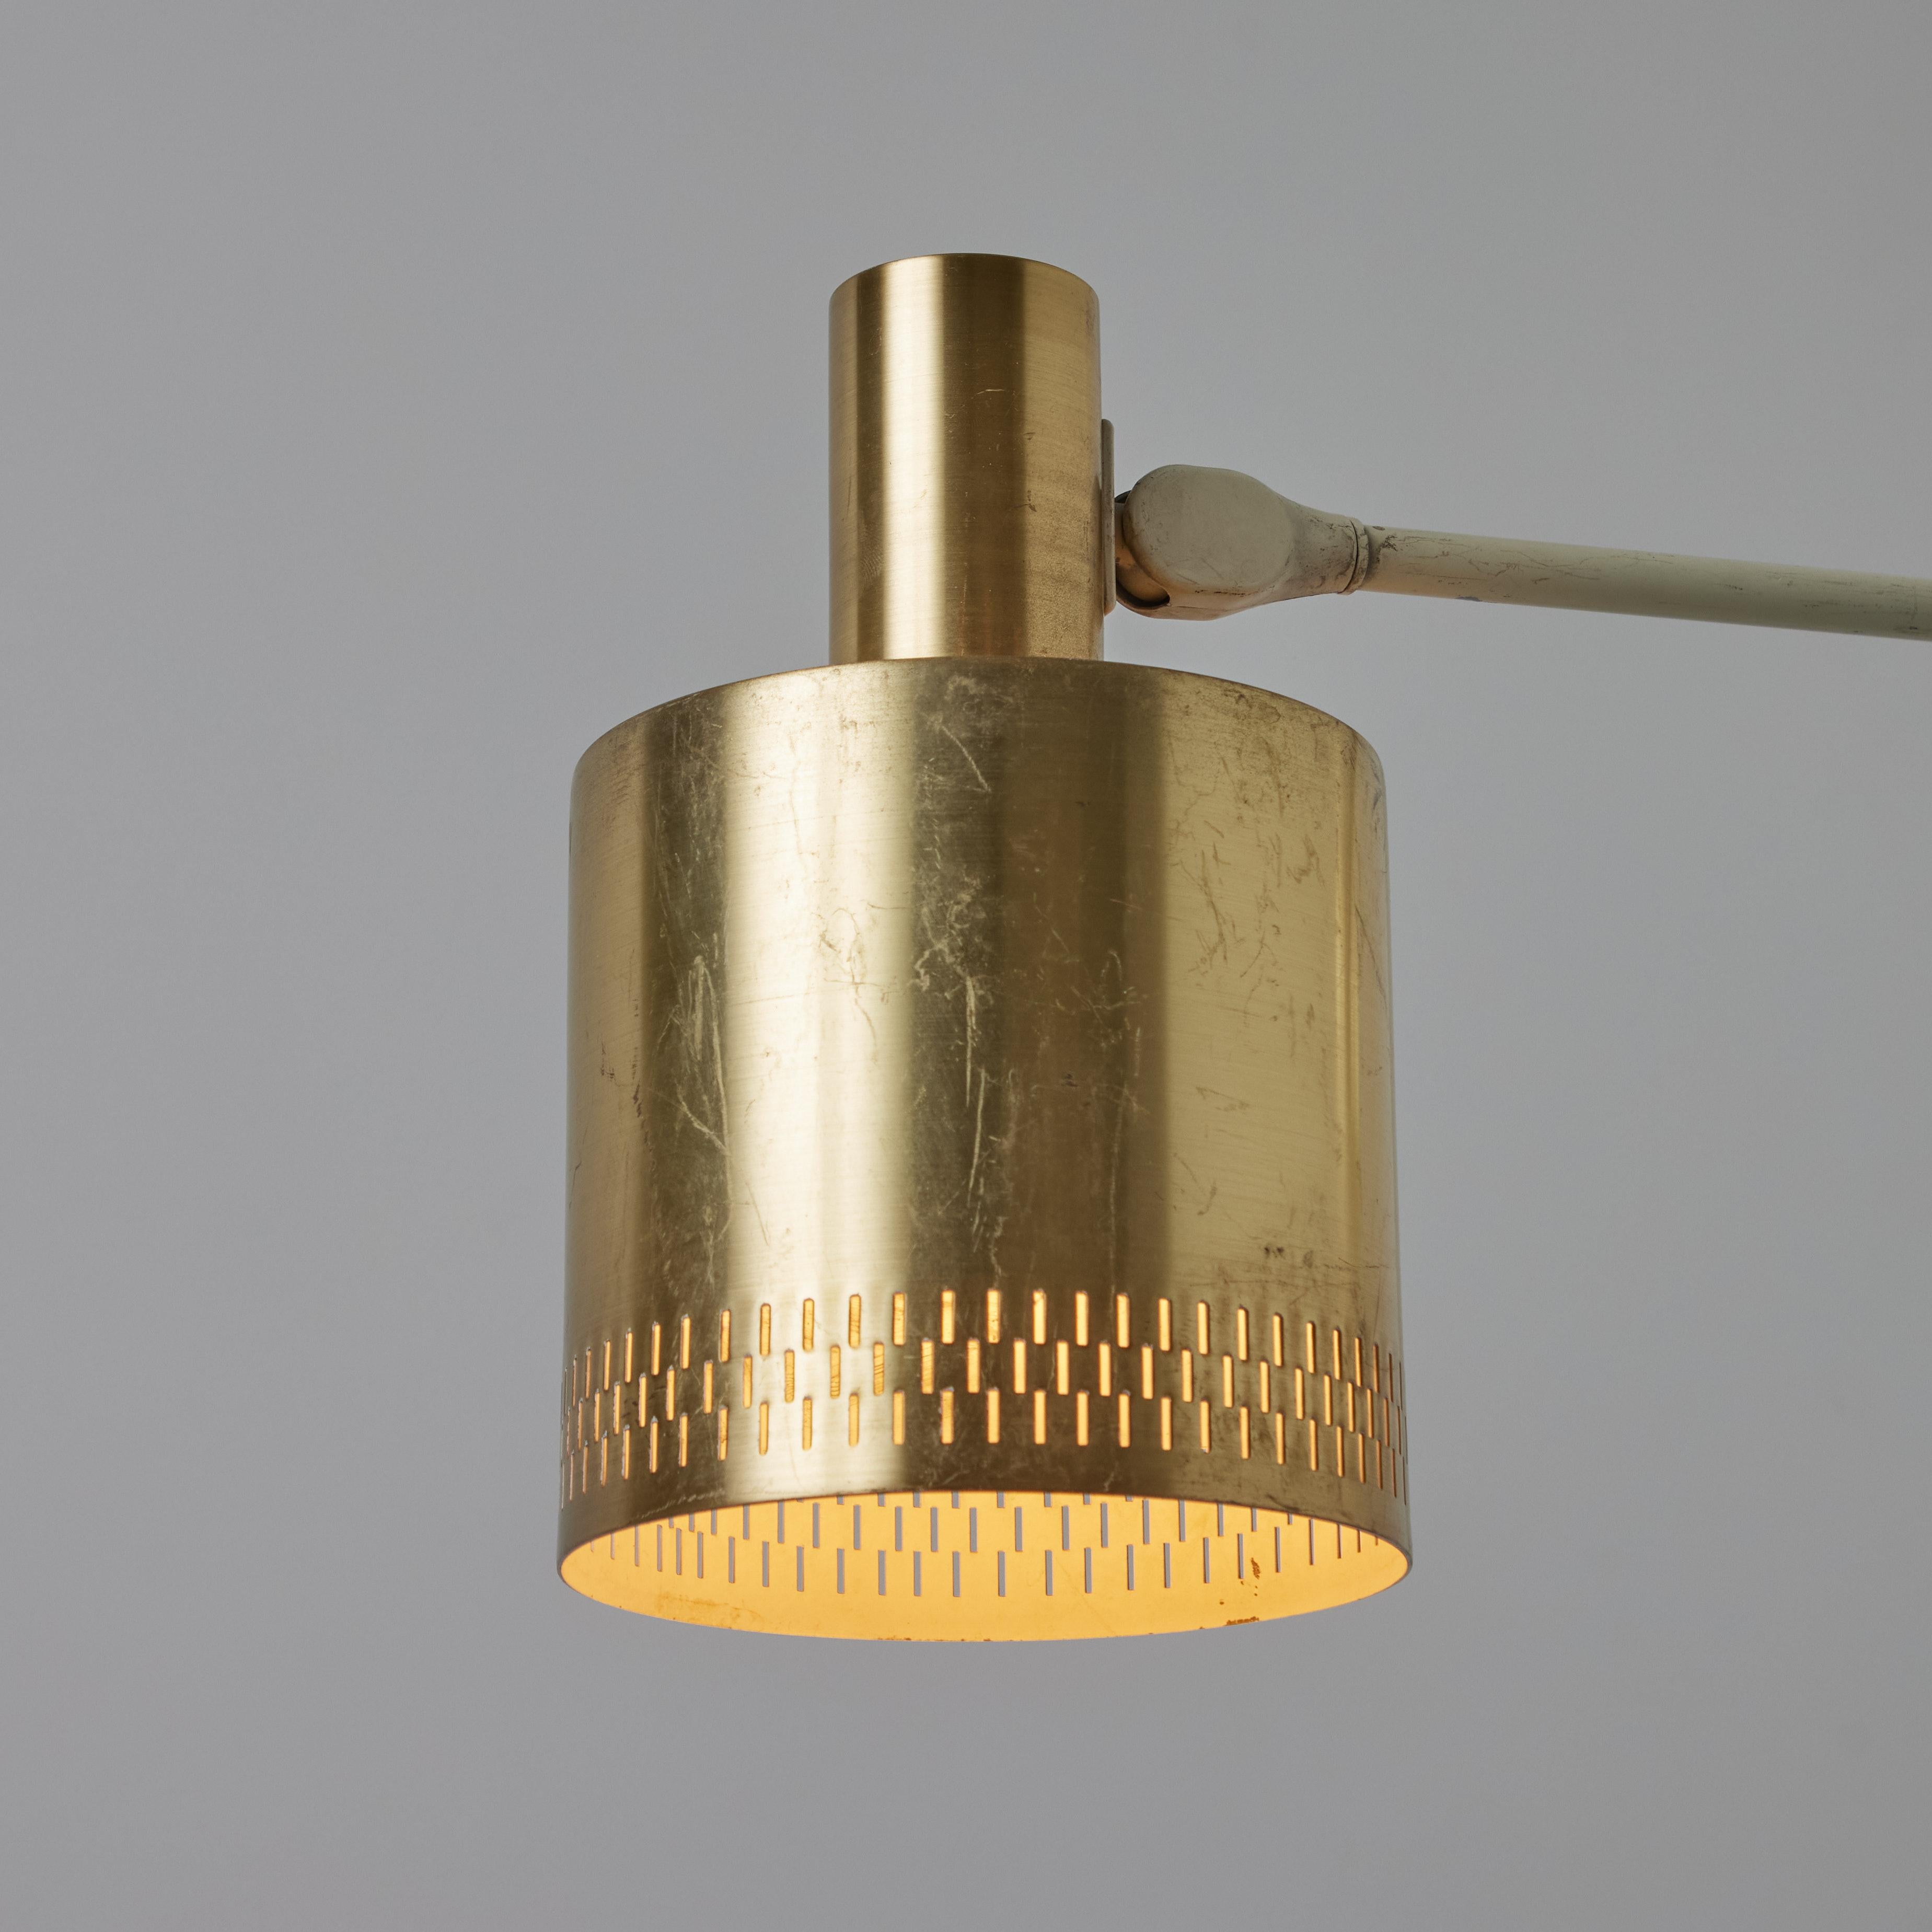 Pair of Large 1950s Jo Hammerborg Perforated Brass Wall Lamps for Fog & Mørup. A minimalist Danish modern design classic executed in brass and white painted metal. A refined pair of wall lamps that is quintessentially Scandinavian. Unmarked.

Fog